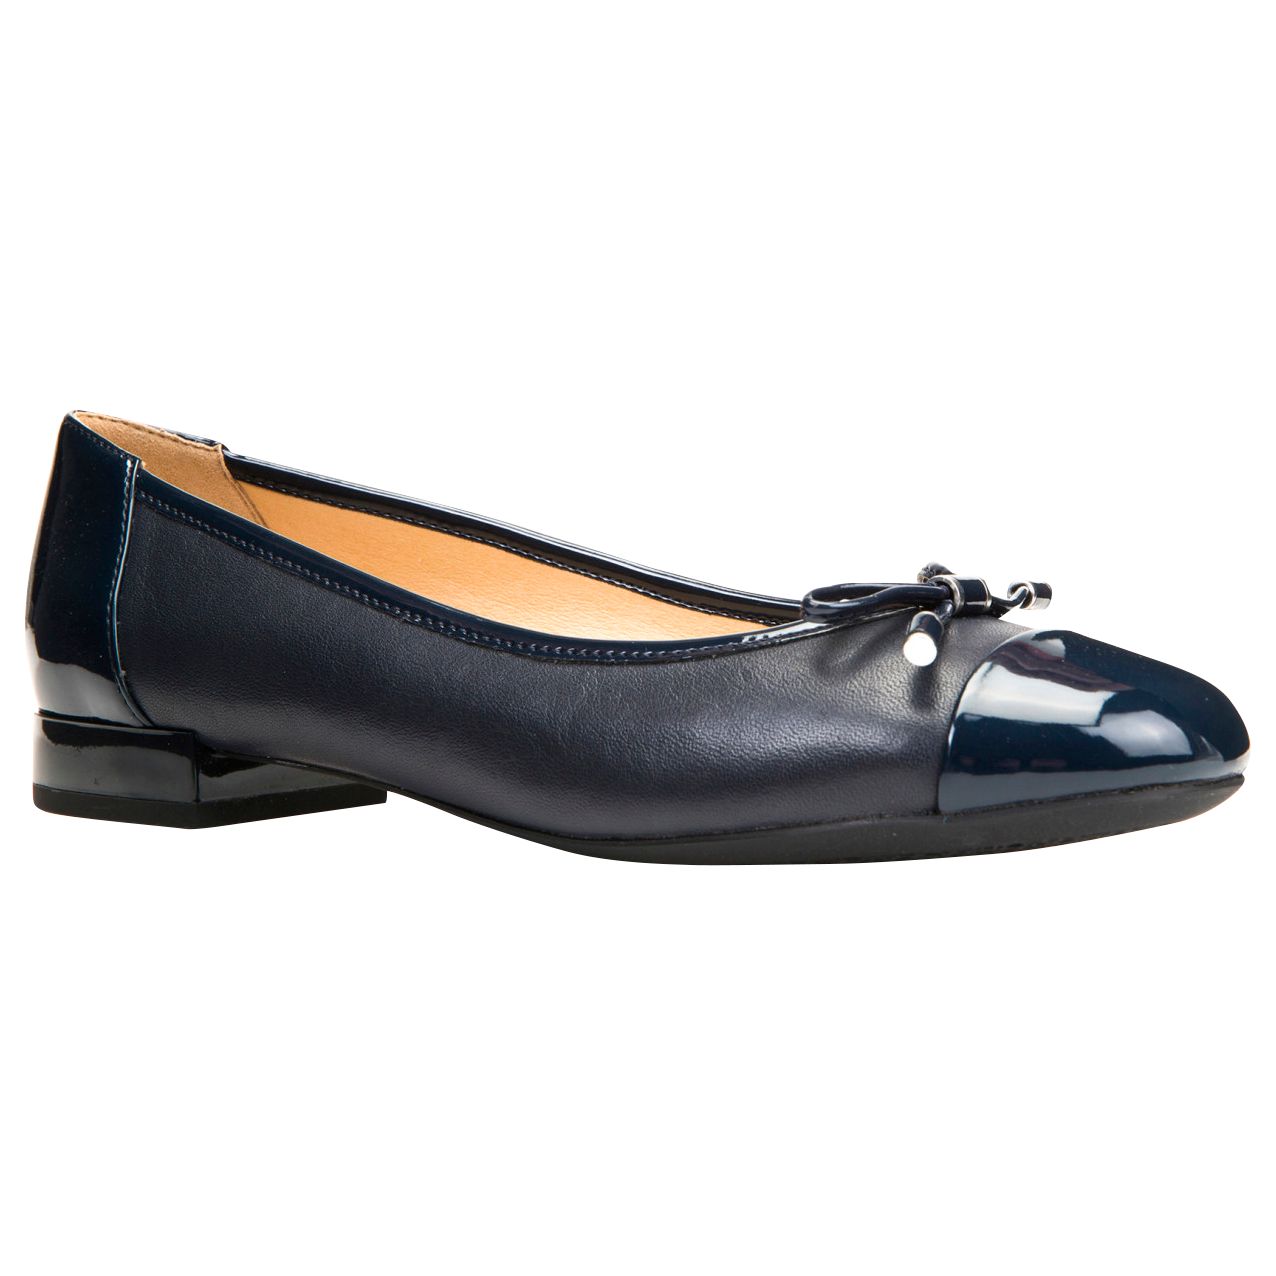 Geox Women's Wistrey Breathable Ballet Pumps, Navy Leather, 3.5